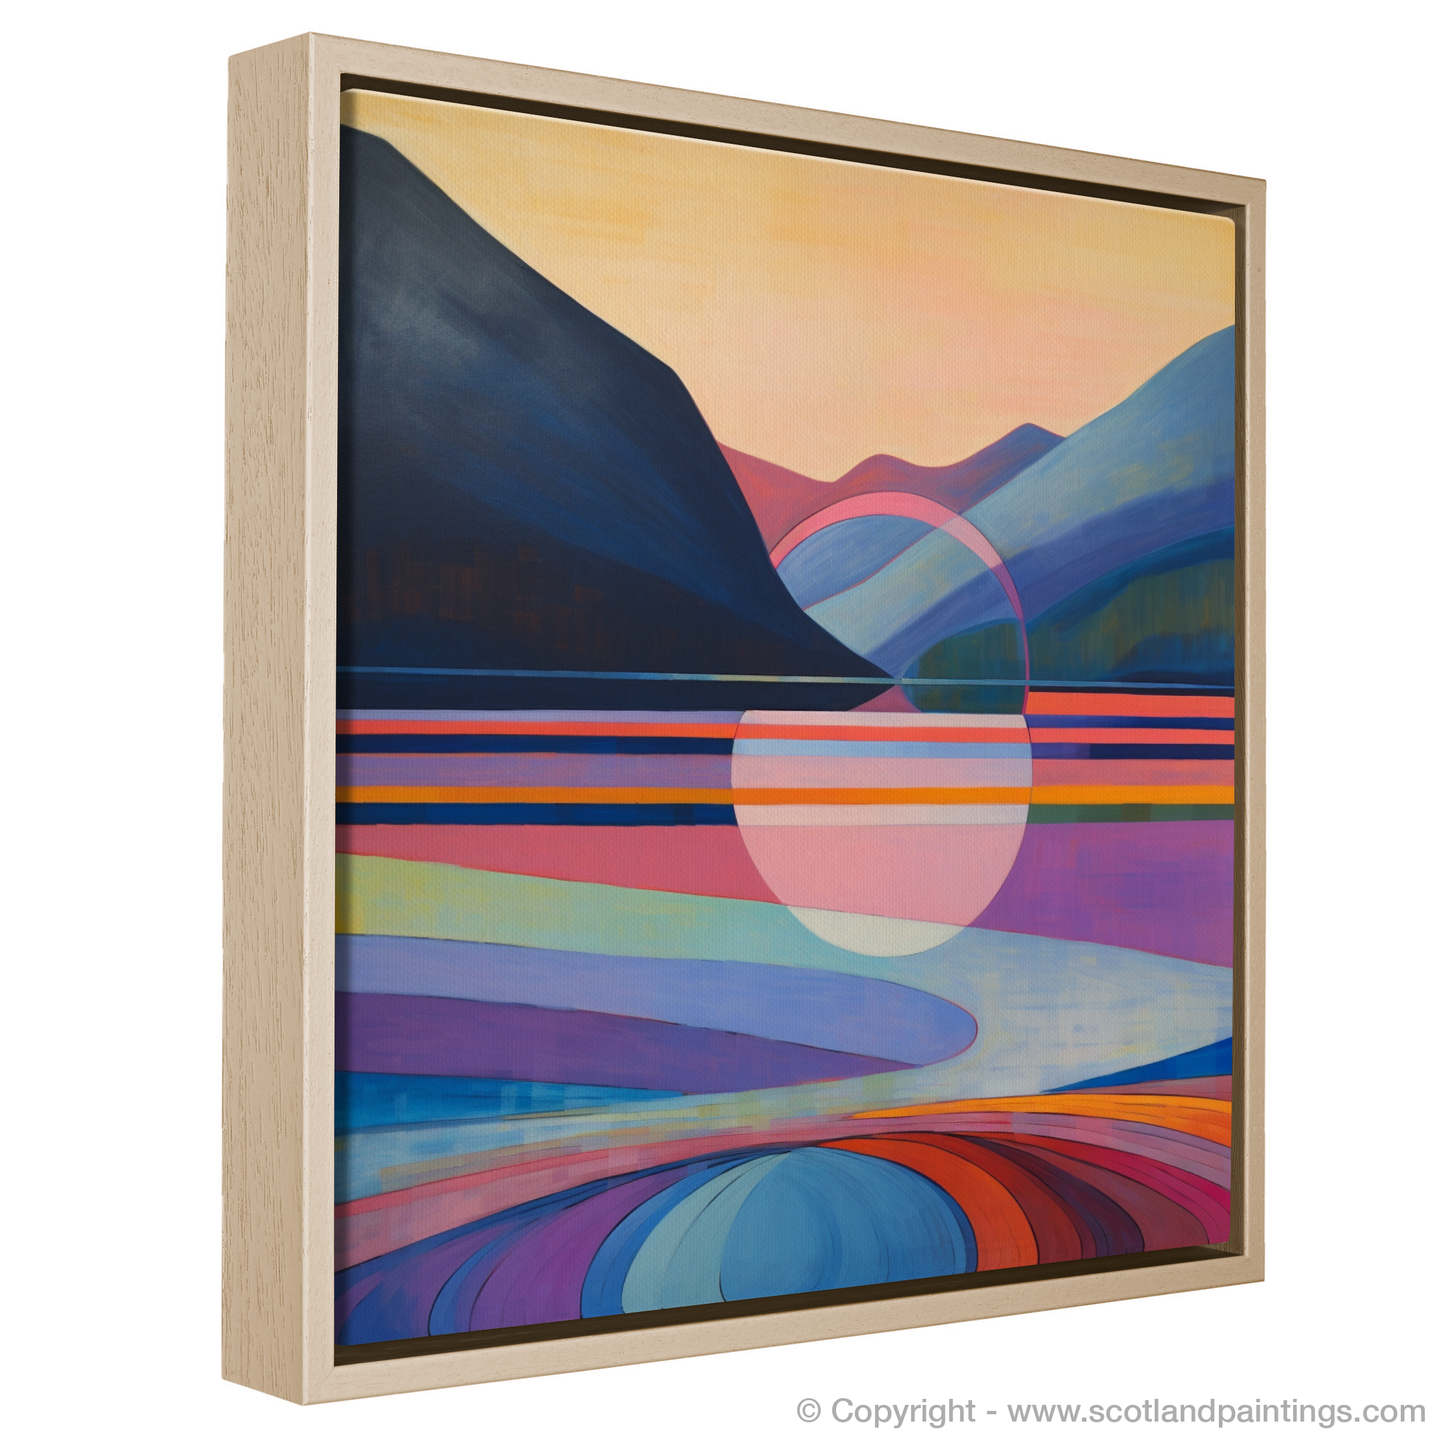 Loch Earn Abstraction: A Color Field Reverie